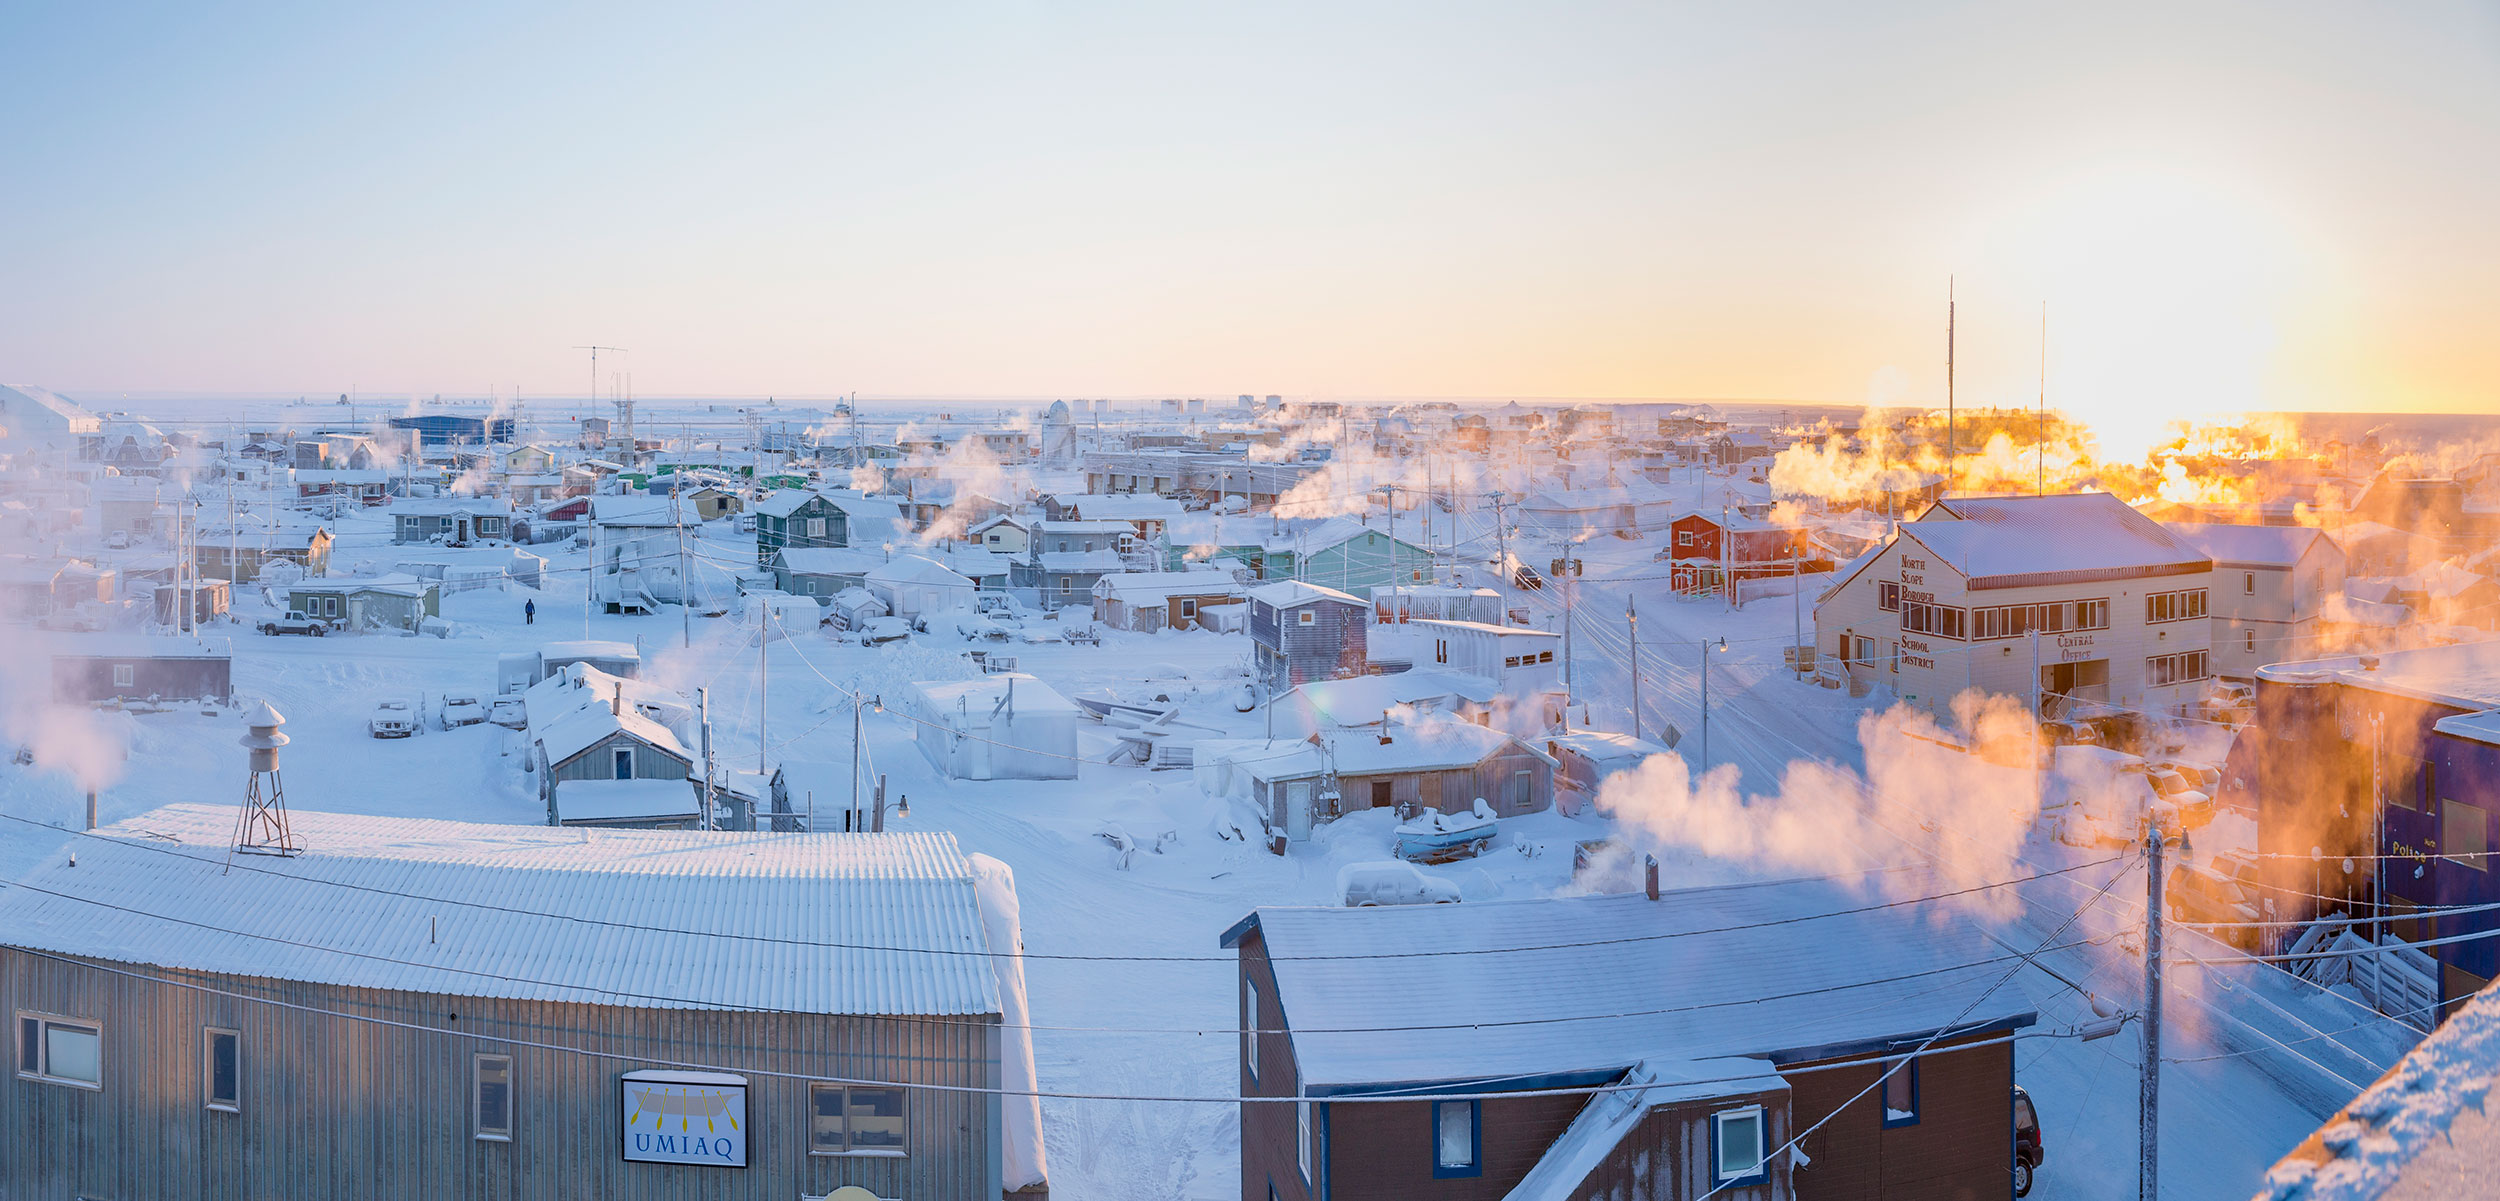 Barrow, Alaska, is the northernmost American city, above the Arctic Circle and along the Chukchi Sea coastline. Photo by Kevin Smith/Design Pics/Corbis